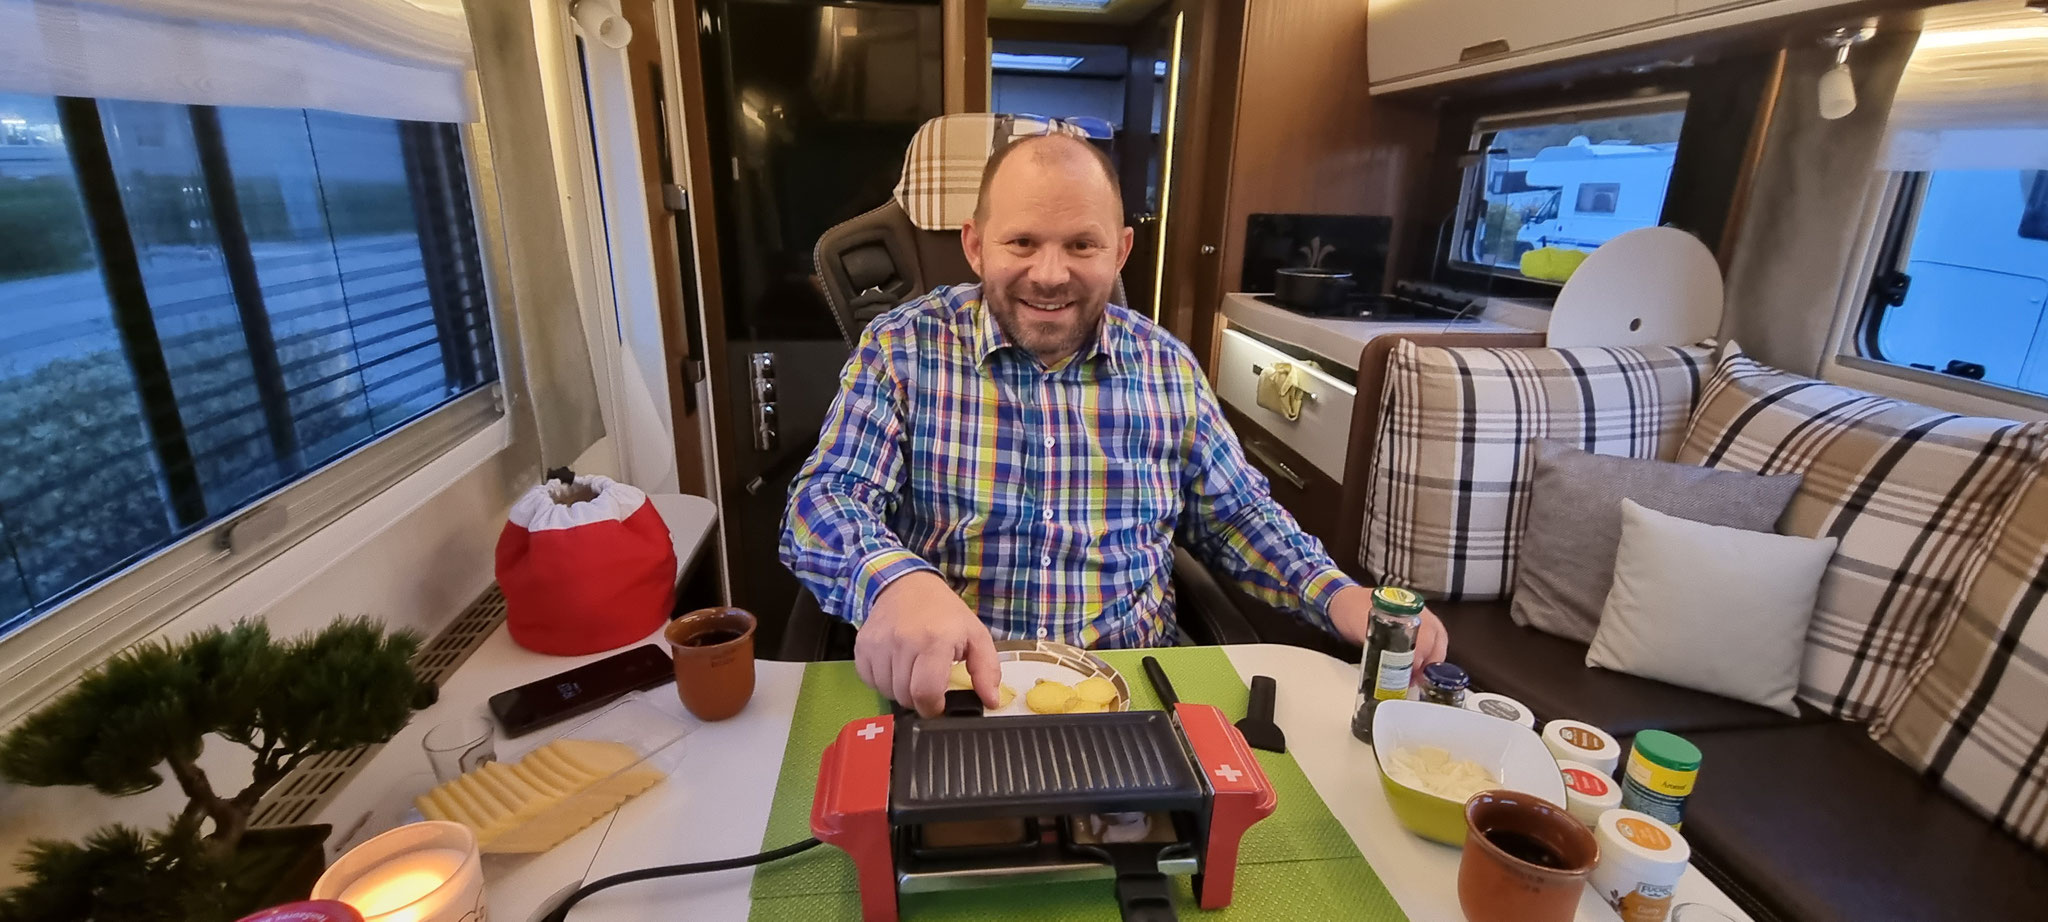 Raclette-Abend bei Züger's